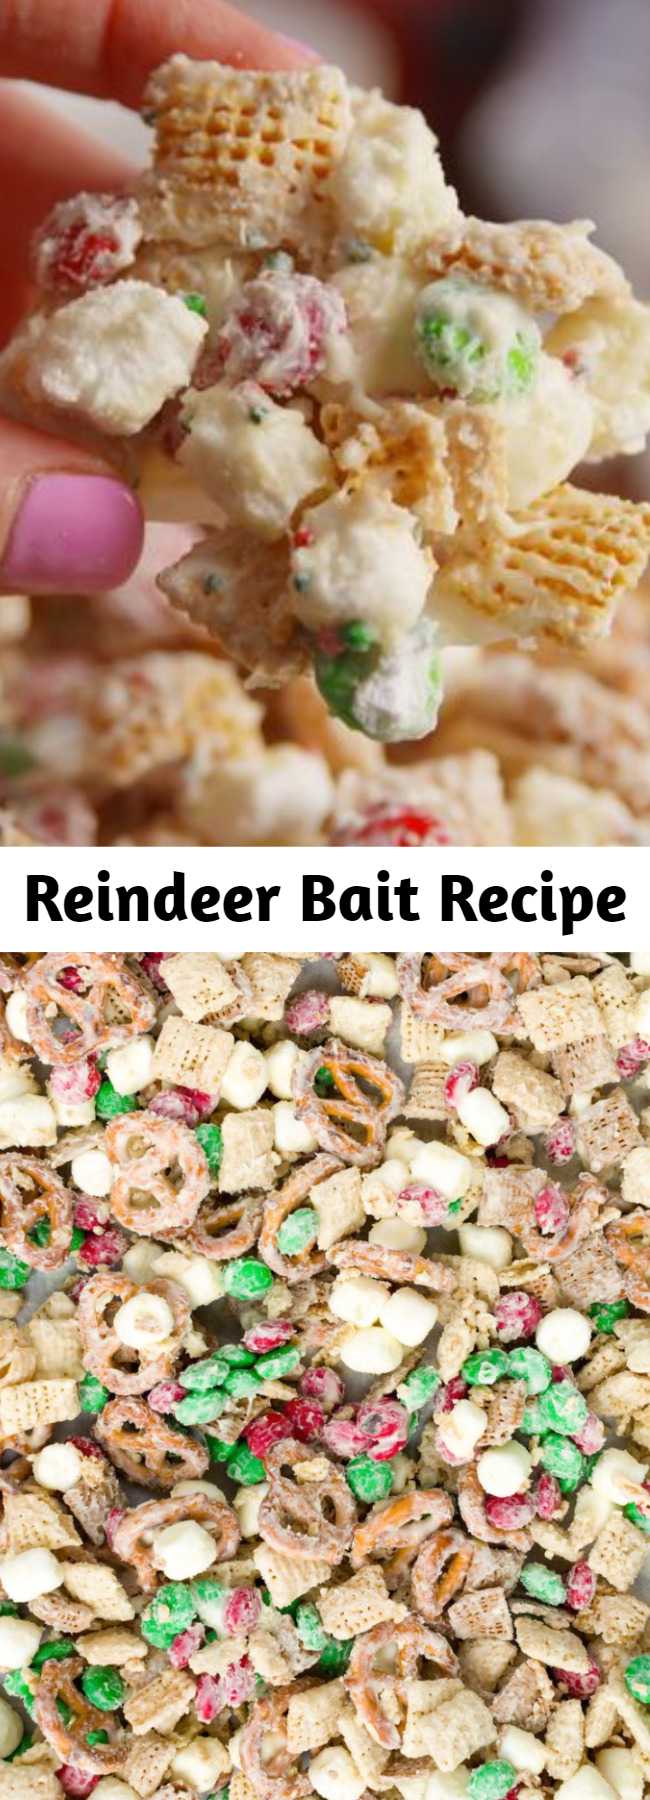 Reindeer Bait Recipe - Don't even think about heading to a Christmas party without a batch of this. #easy #recipe #reindeer #bait #reindeerpoop #chexmix #snacks #mm #kids #christmas #marshmallows #trailmix #pretzels #salty #sweet #nobake #dessert